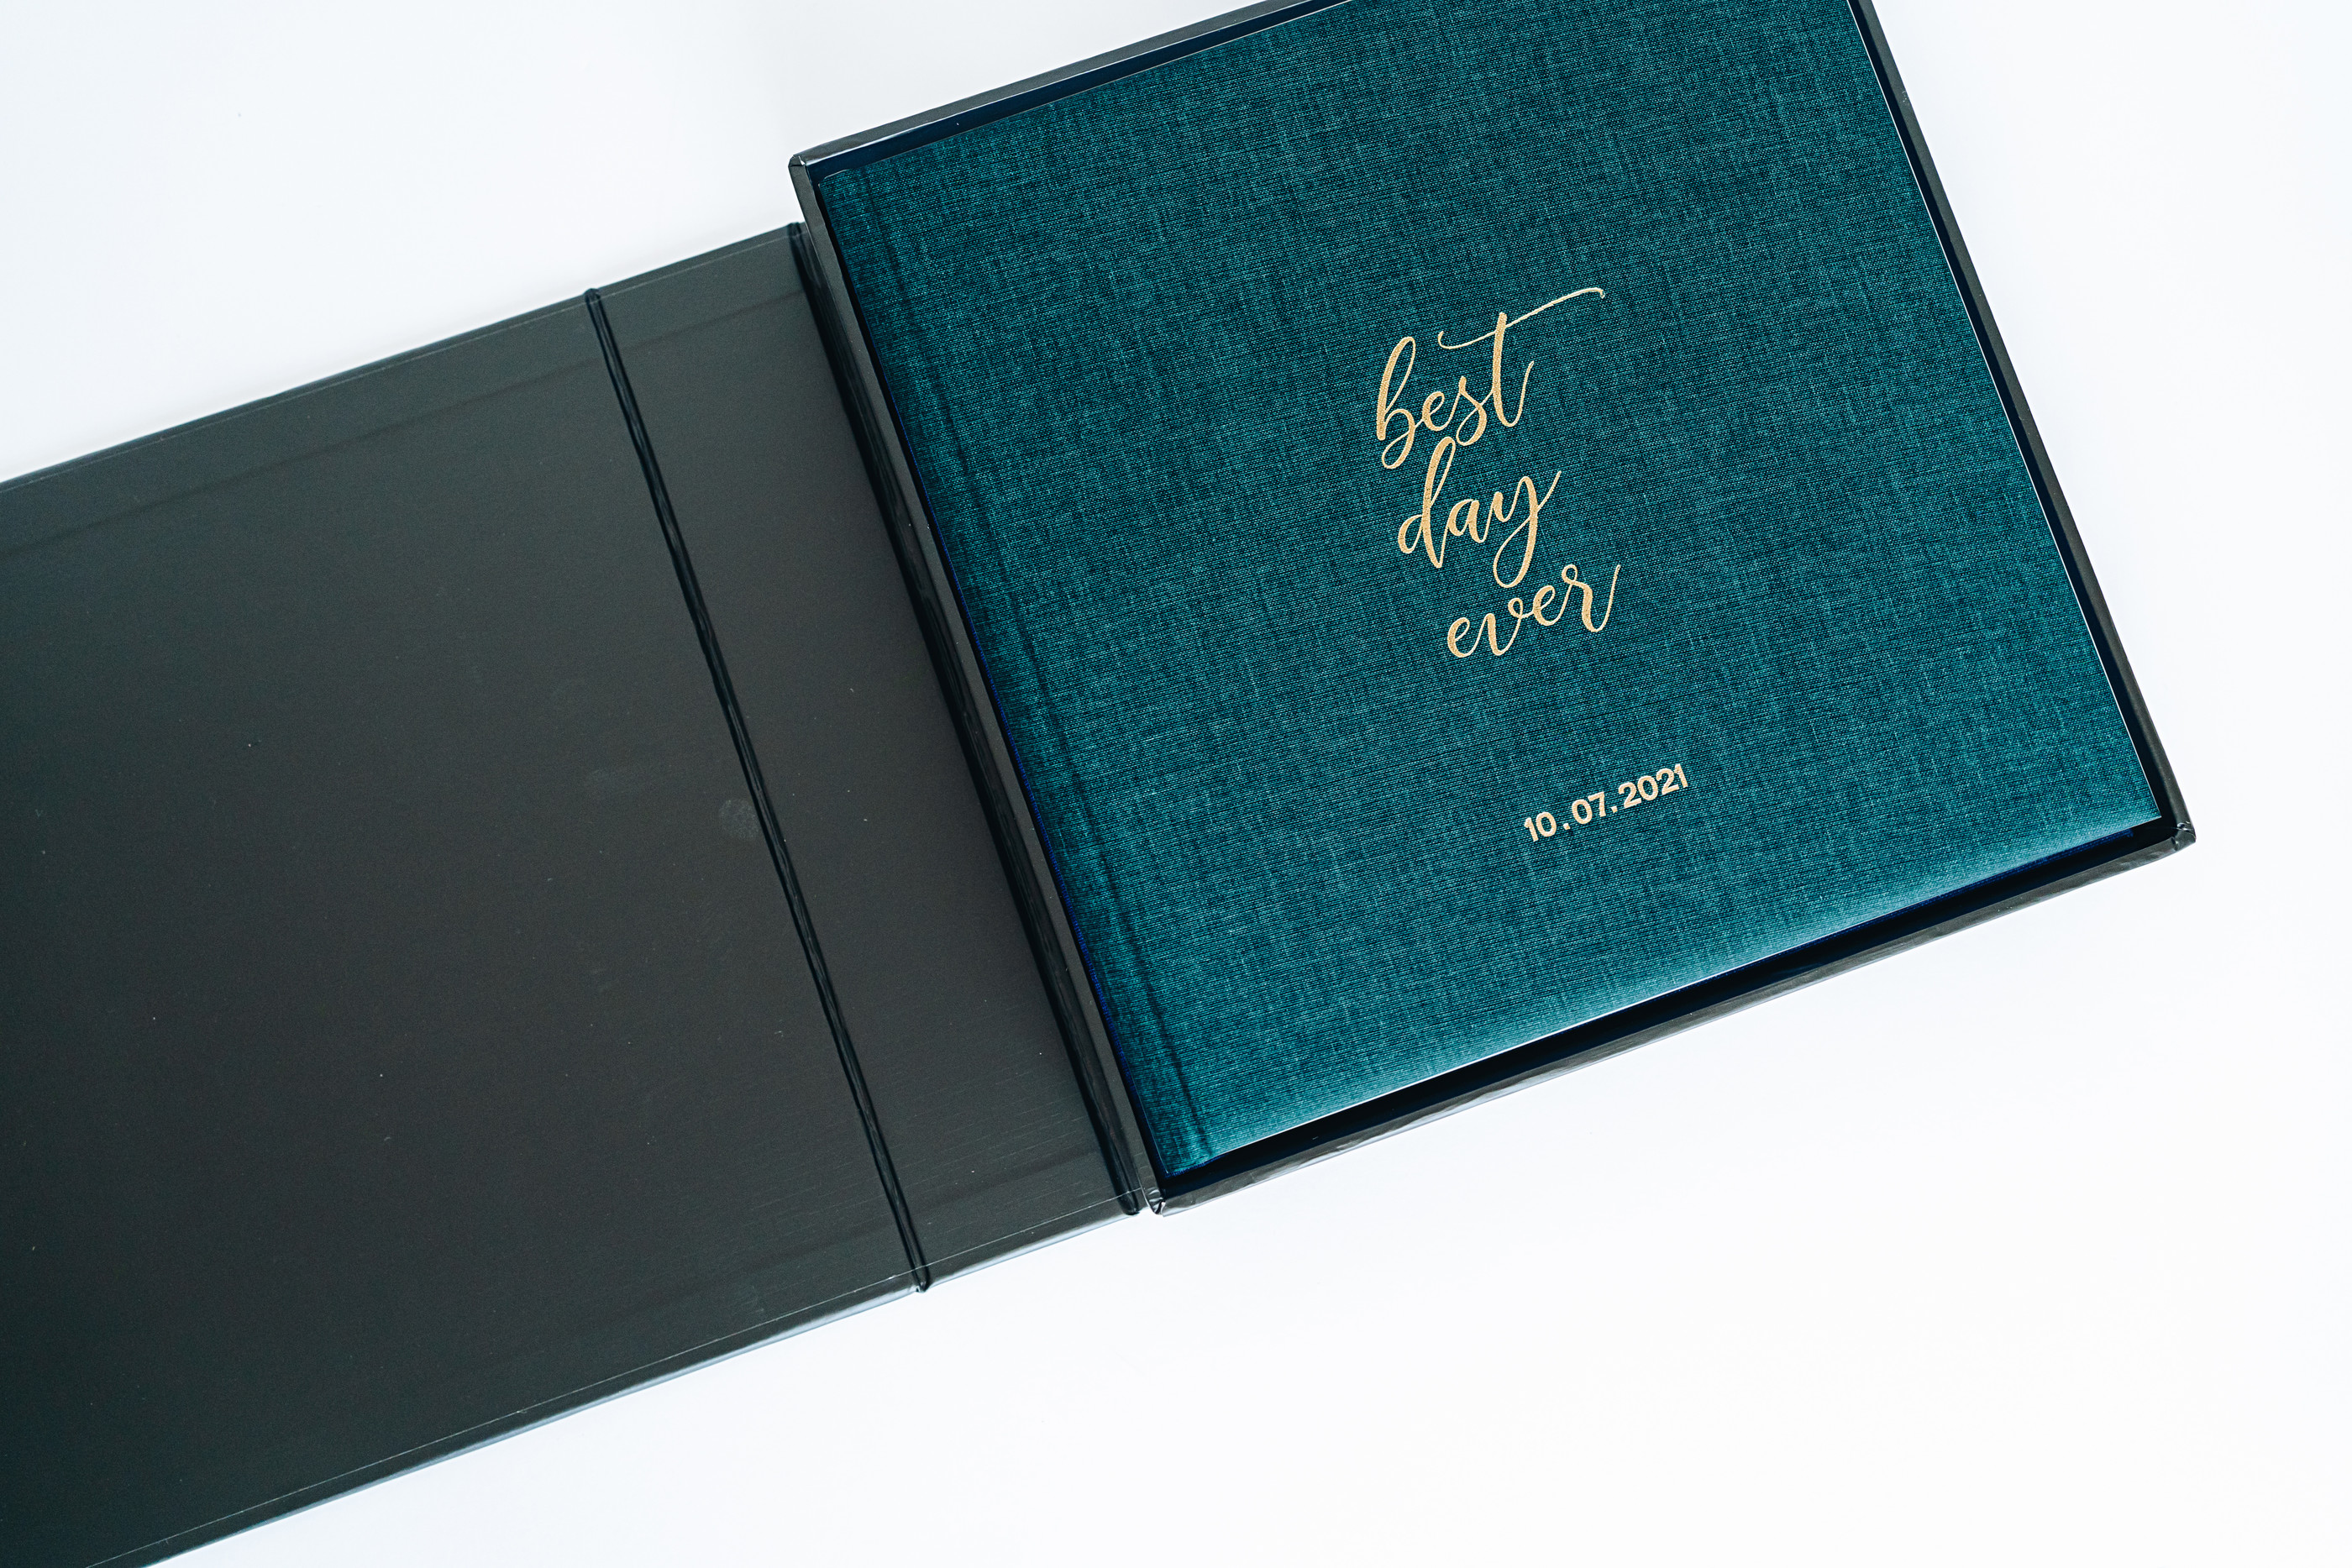 Best Day Ever wedding photo book in box